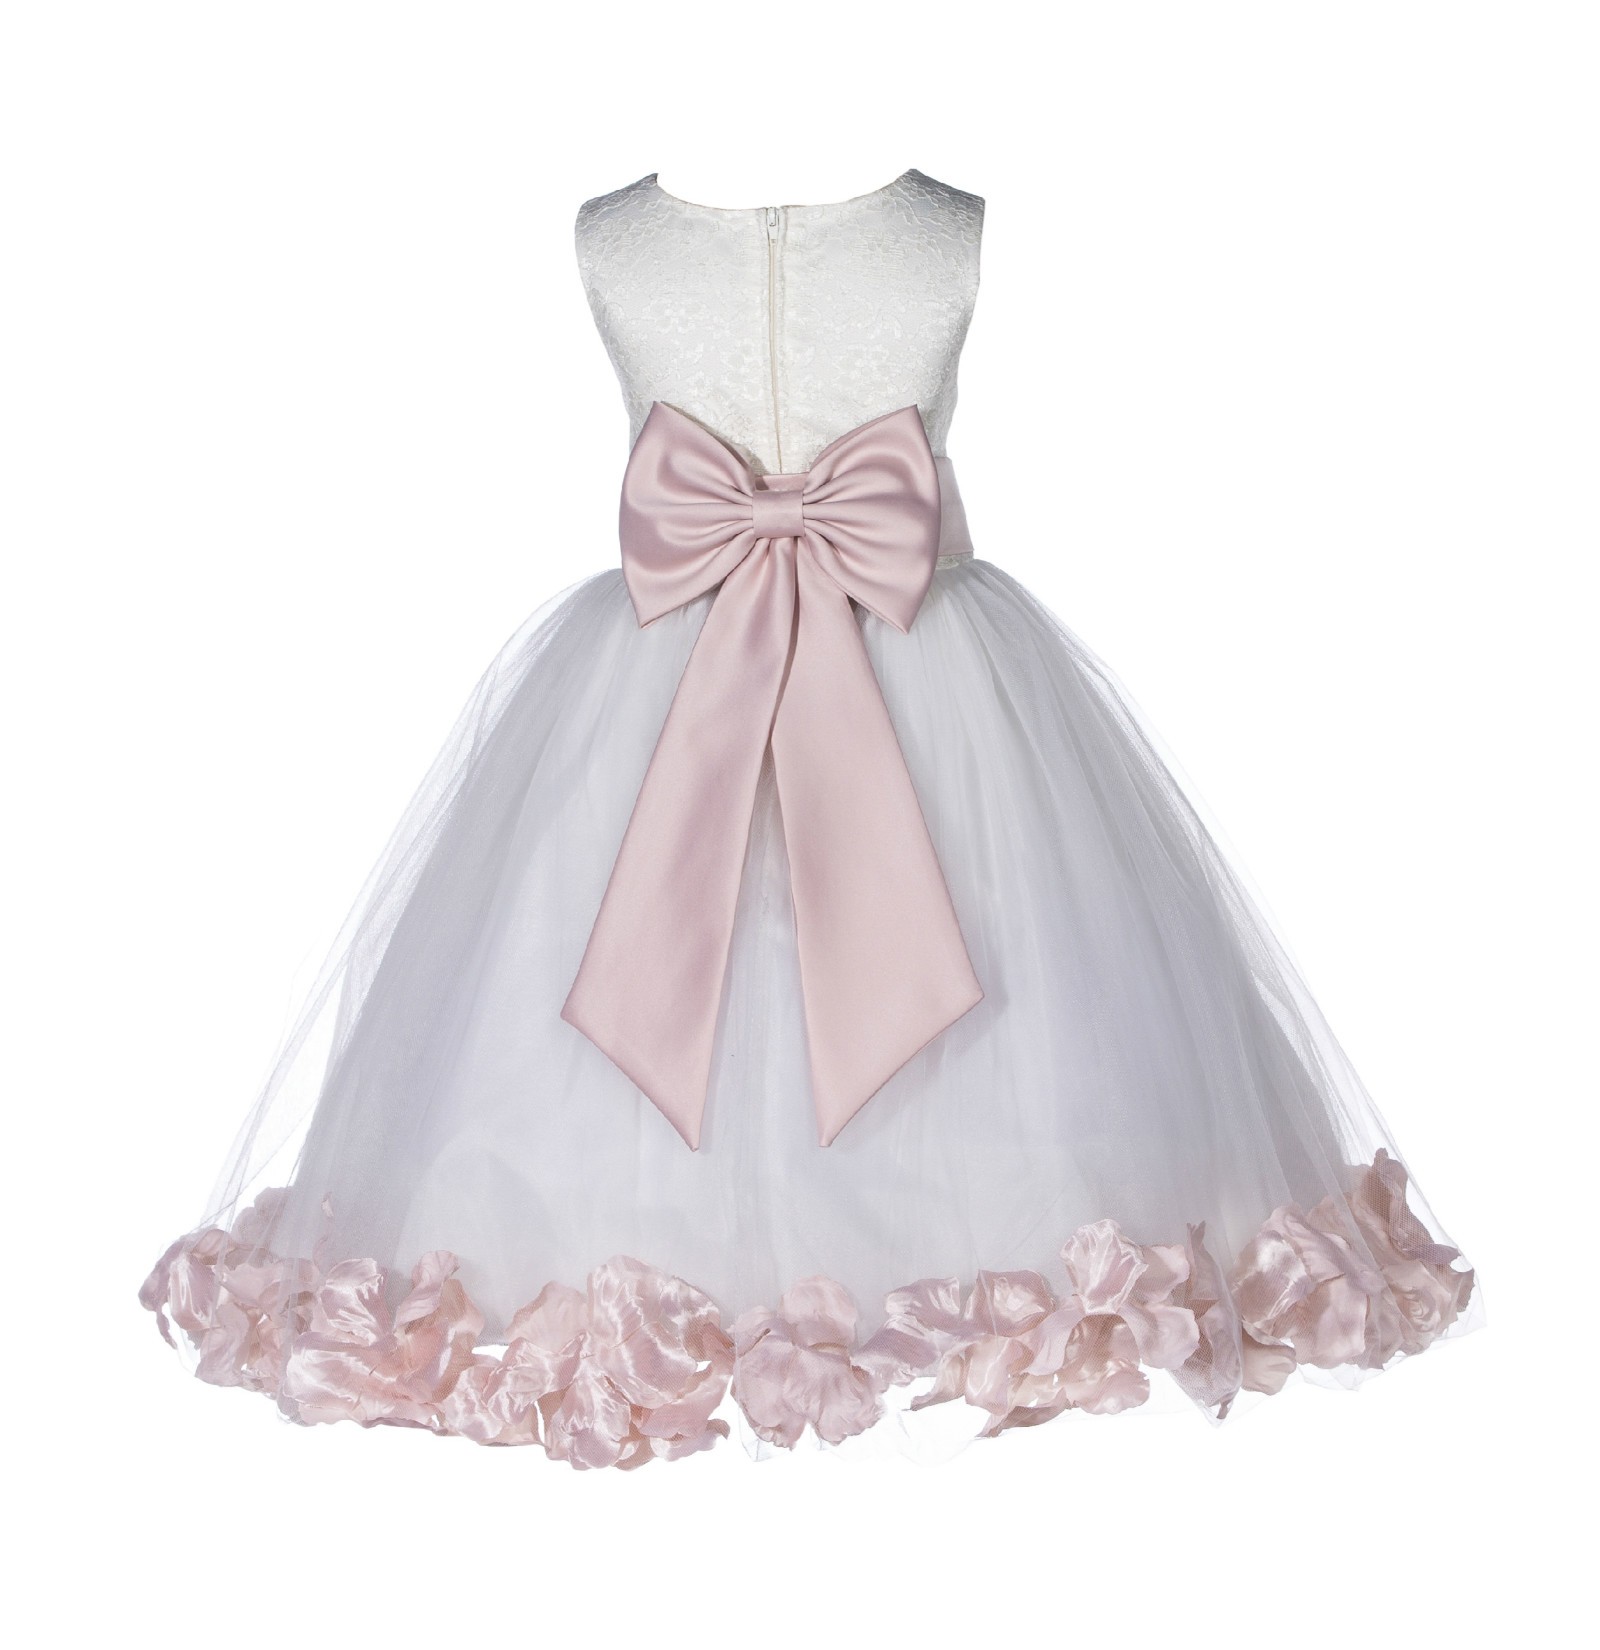 Ivory/Blush Pink Lace Top Floral Petals Ivory Flower Girl Dress 165T